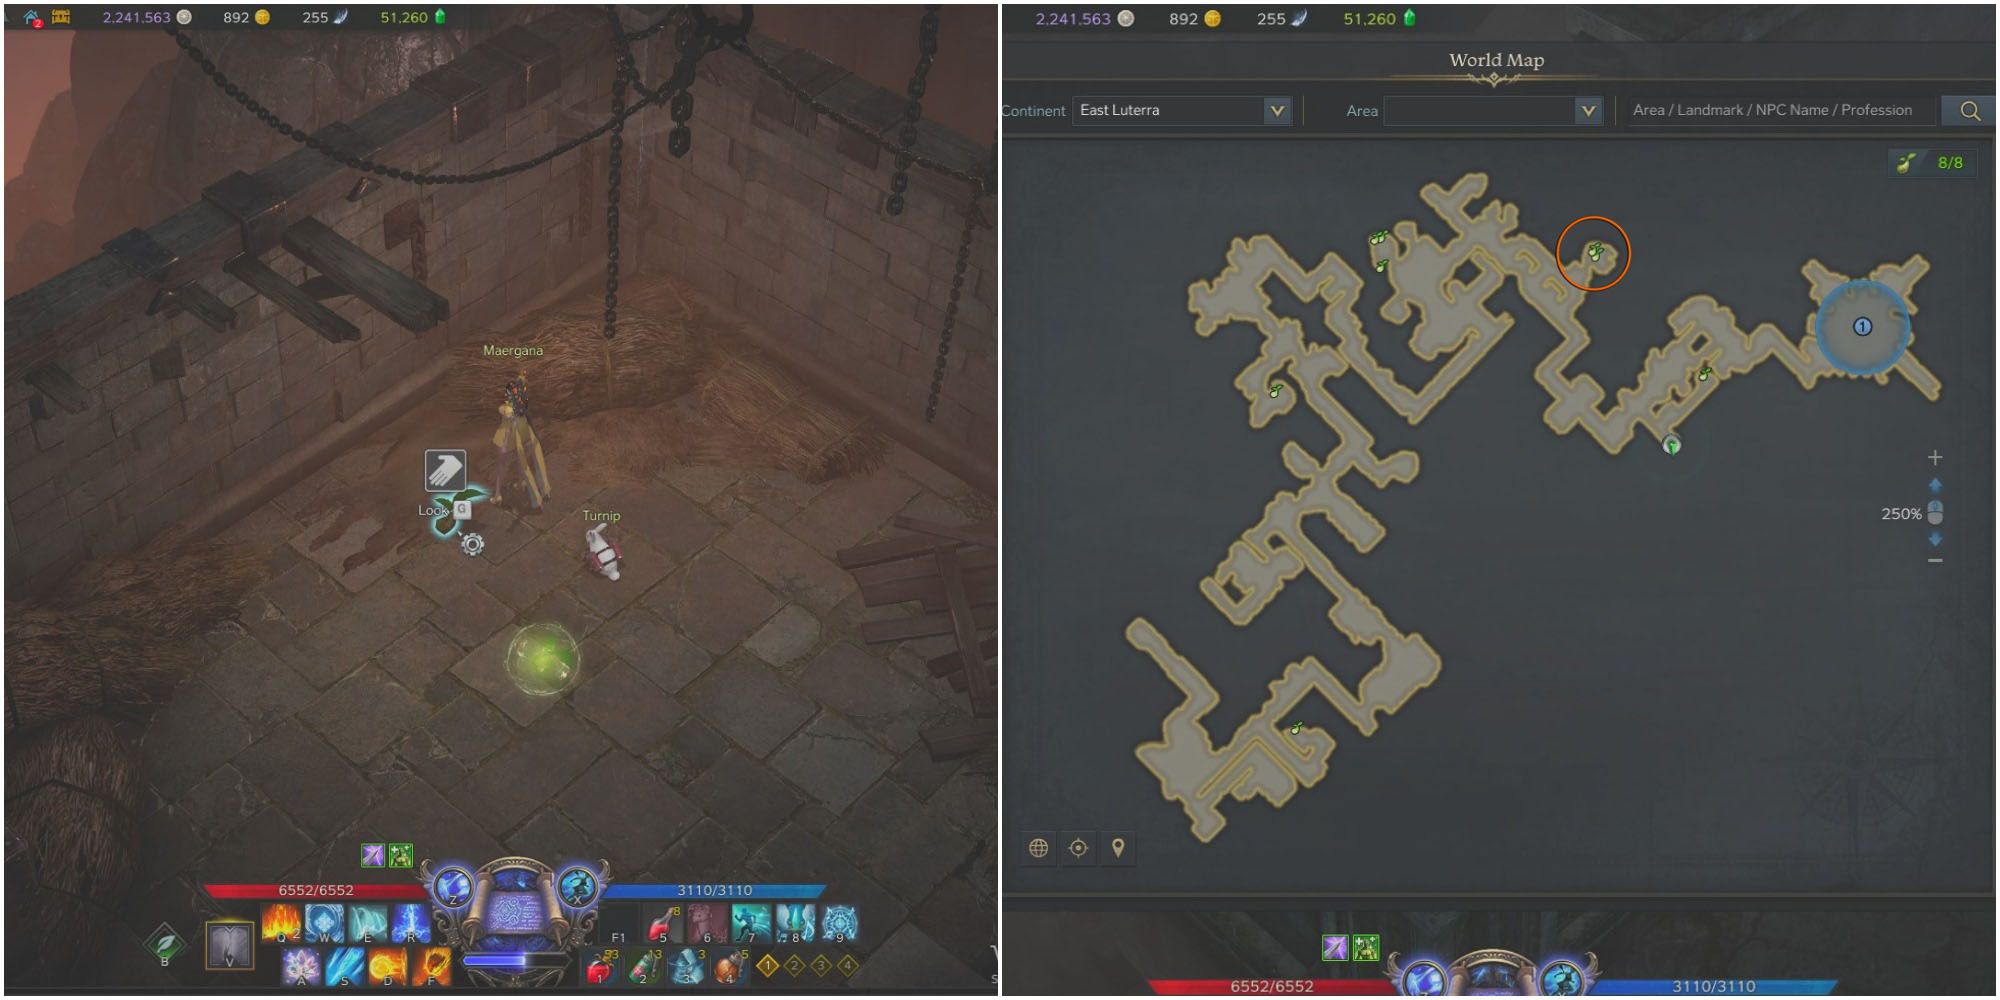 split image of player finding Mokoko Seed 7 in gated dungeon and map of blackrose basement